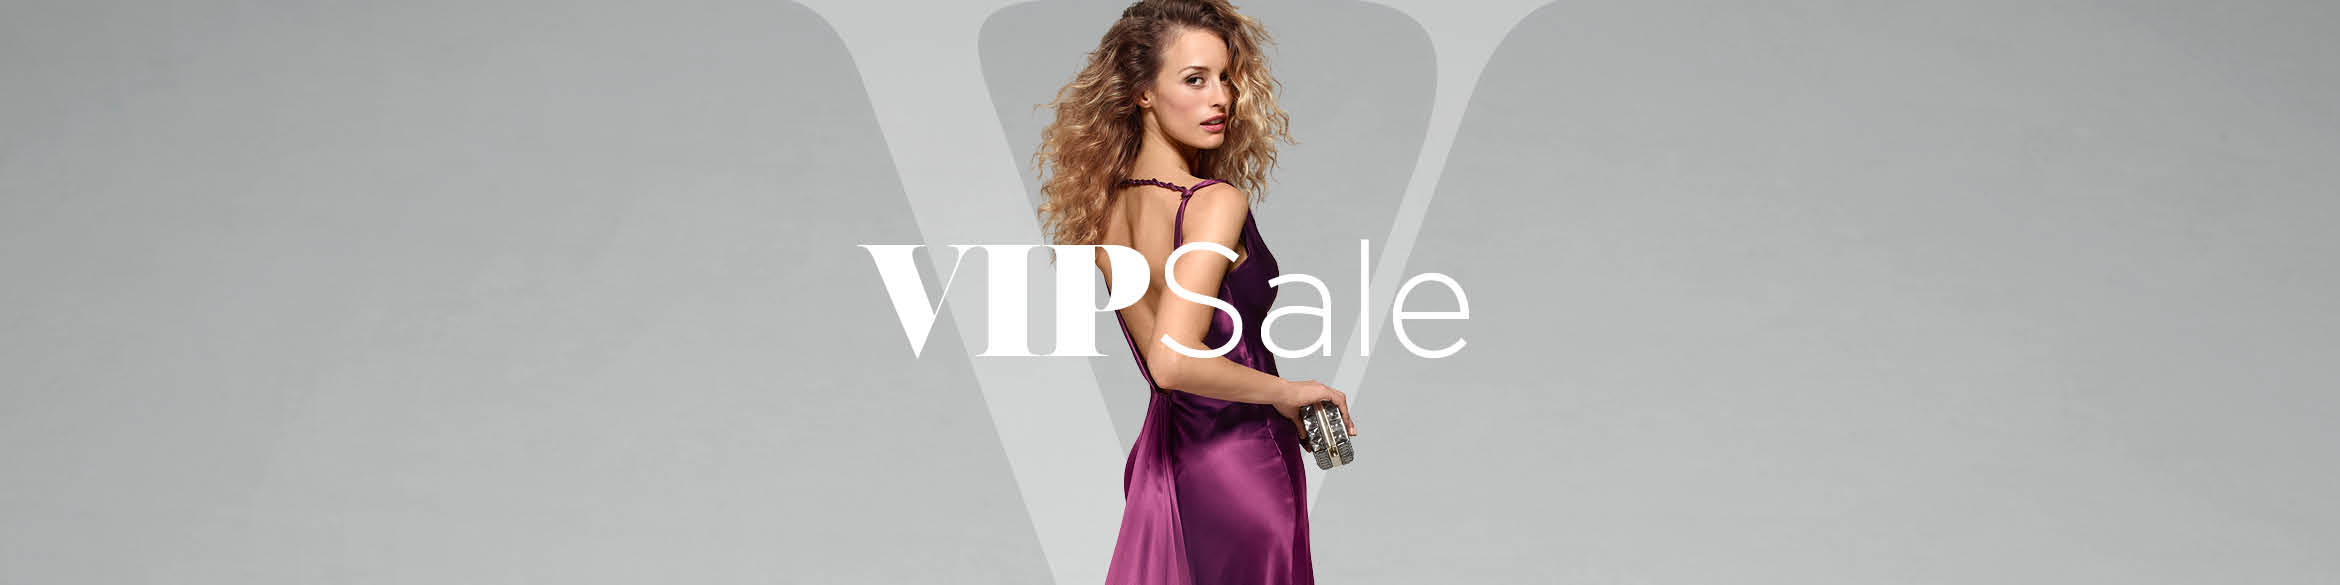 VIP SALE: 20% EXTRA FROM SEPTEMBER 23 TO 25 IF YOU ARE VIP OF LA TORRE OUTLET ZARAGOZA